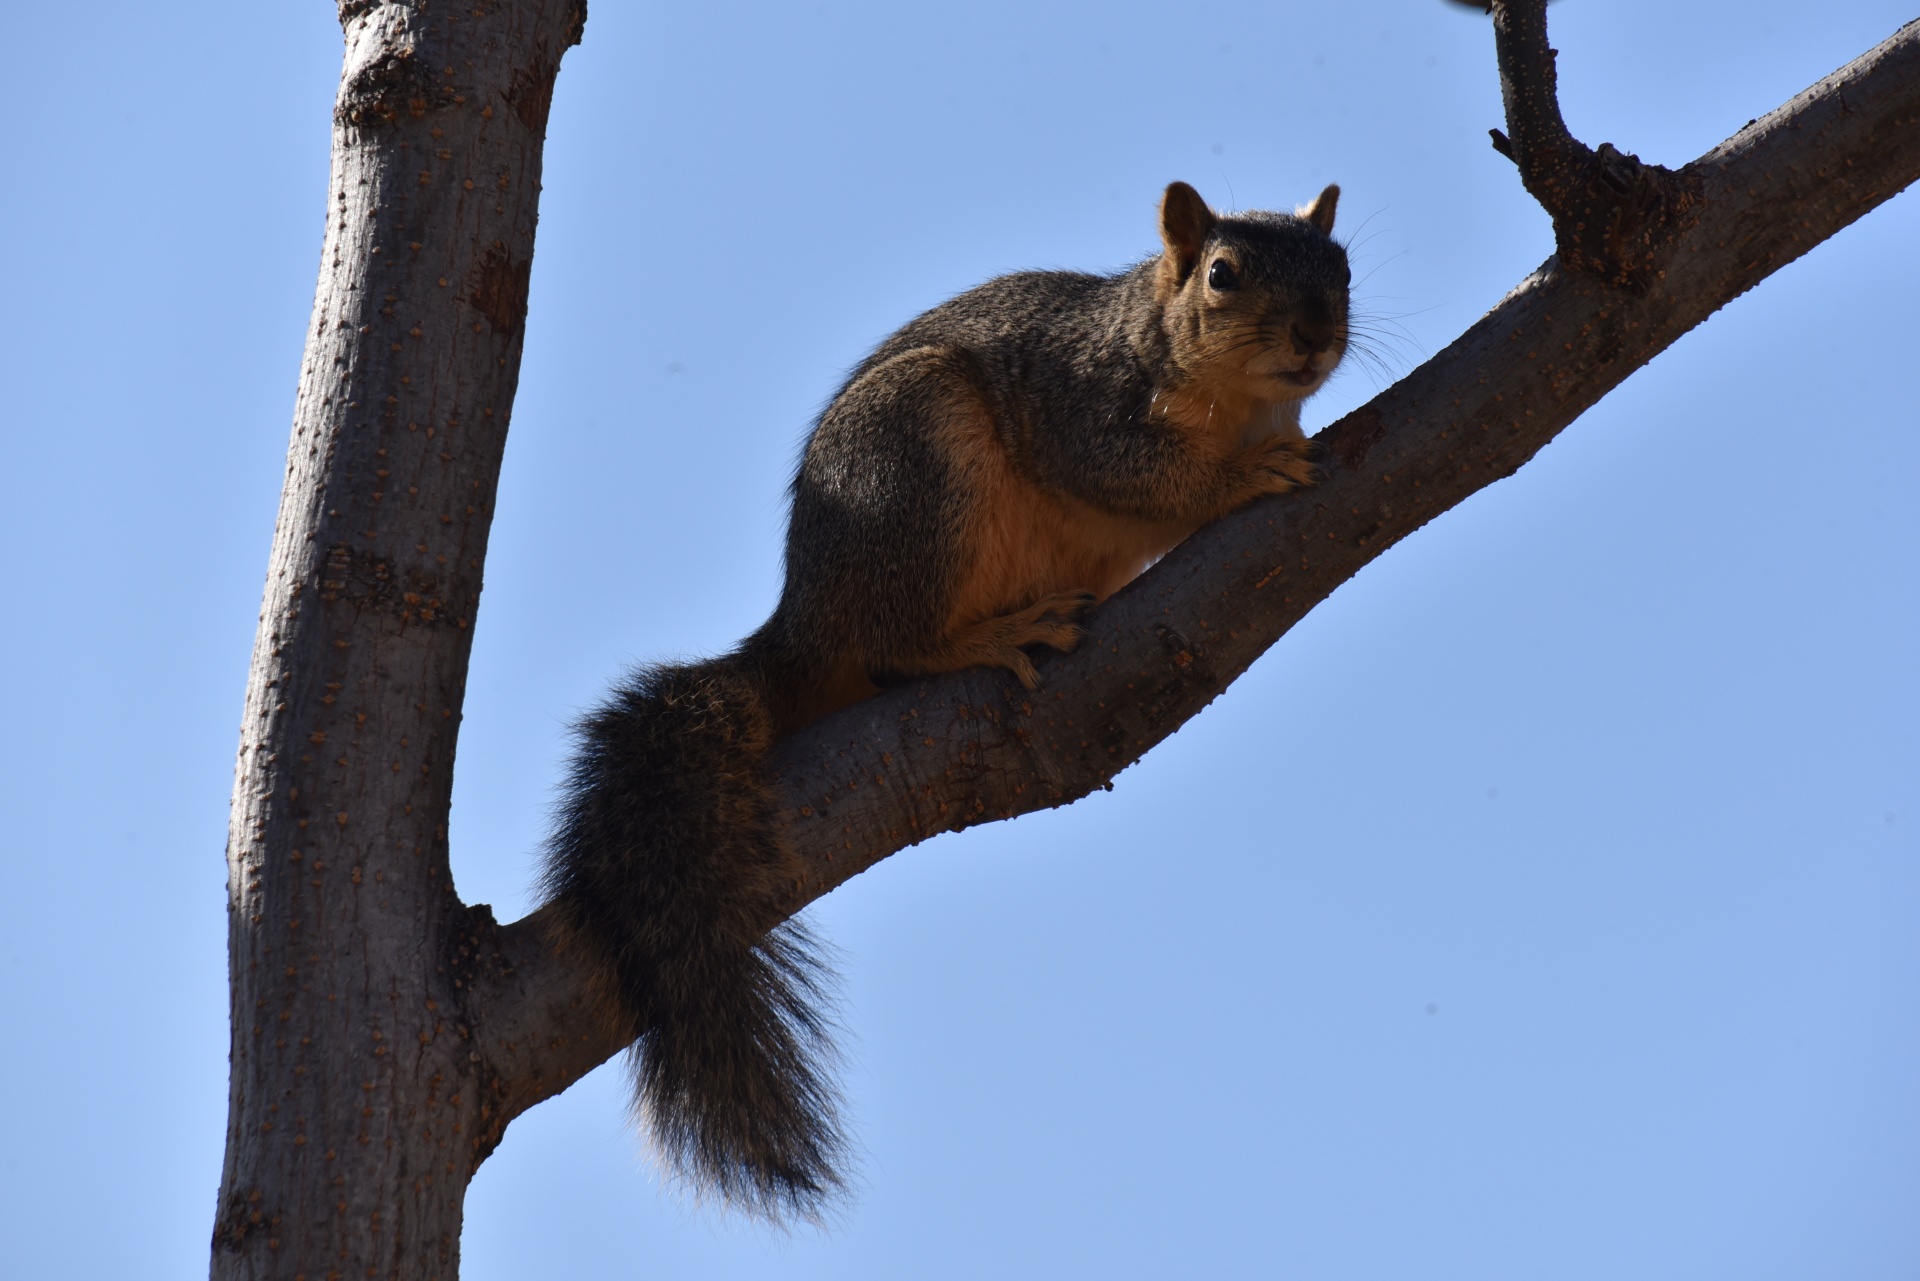 Brown squirrel on a tree branch looking at camera